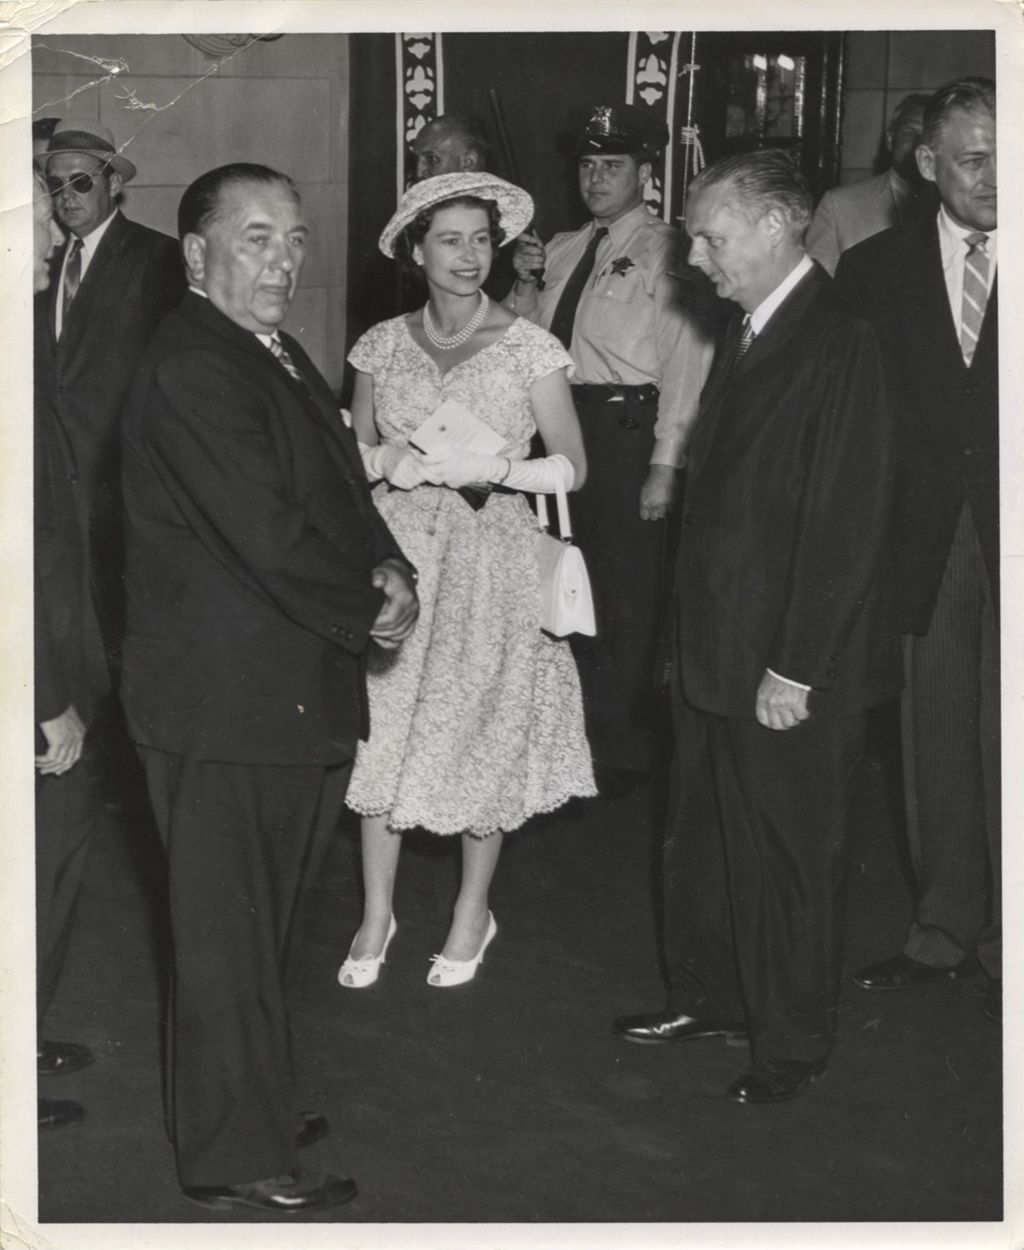 Miniature of Richard J. Daley, Queen Elizabeth II, and William Stratton at a reception